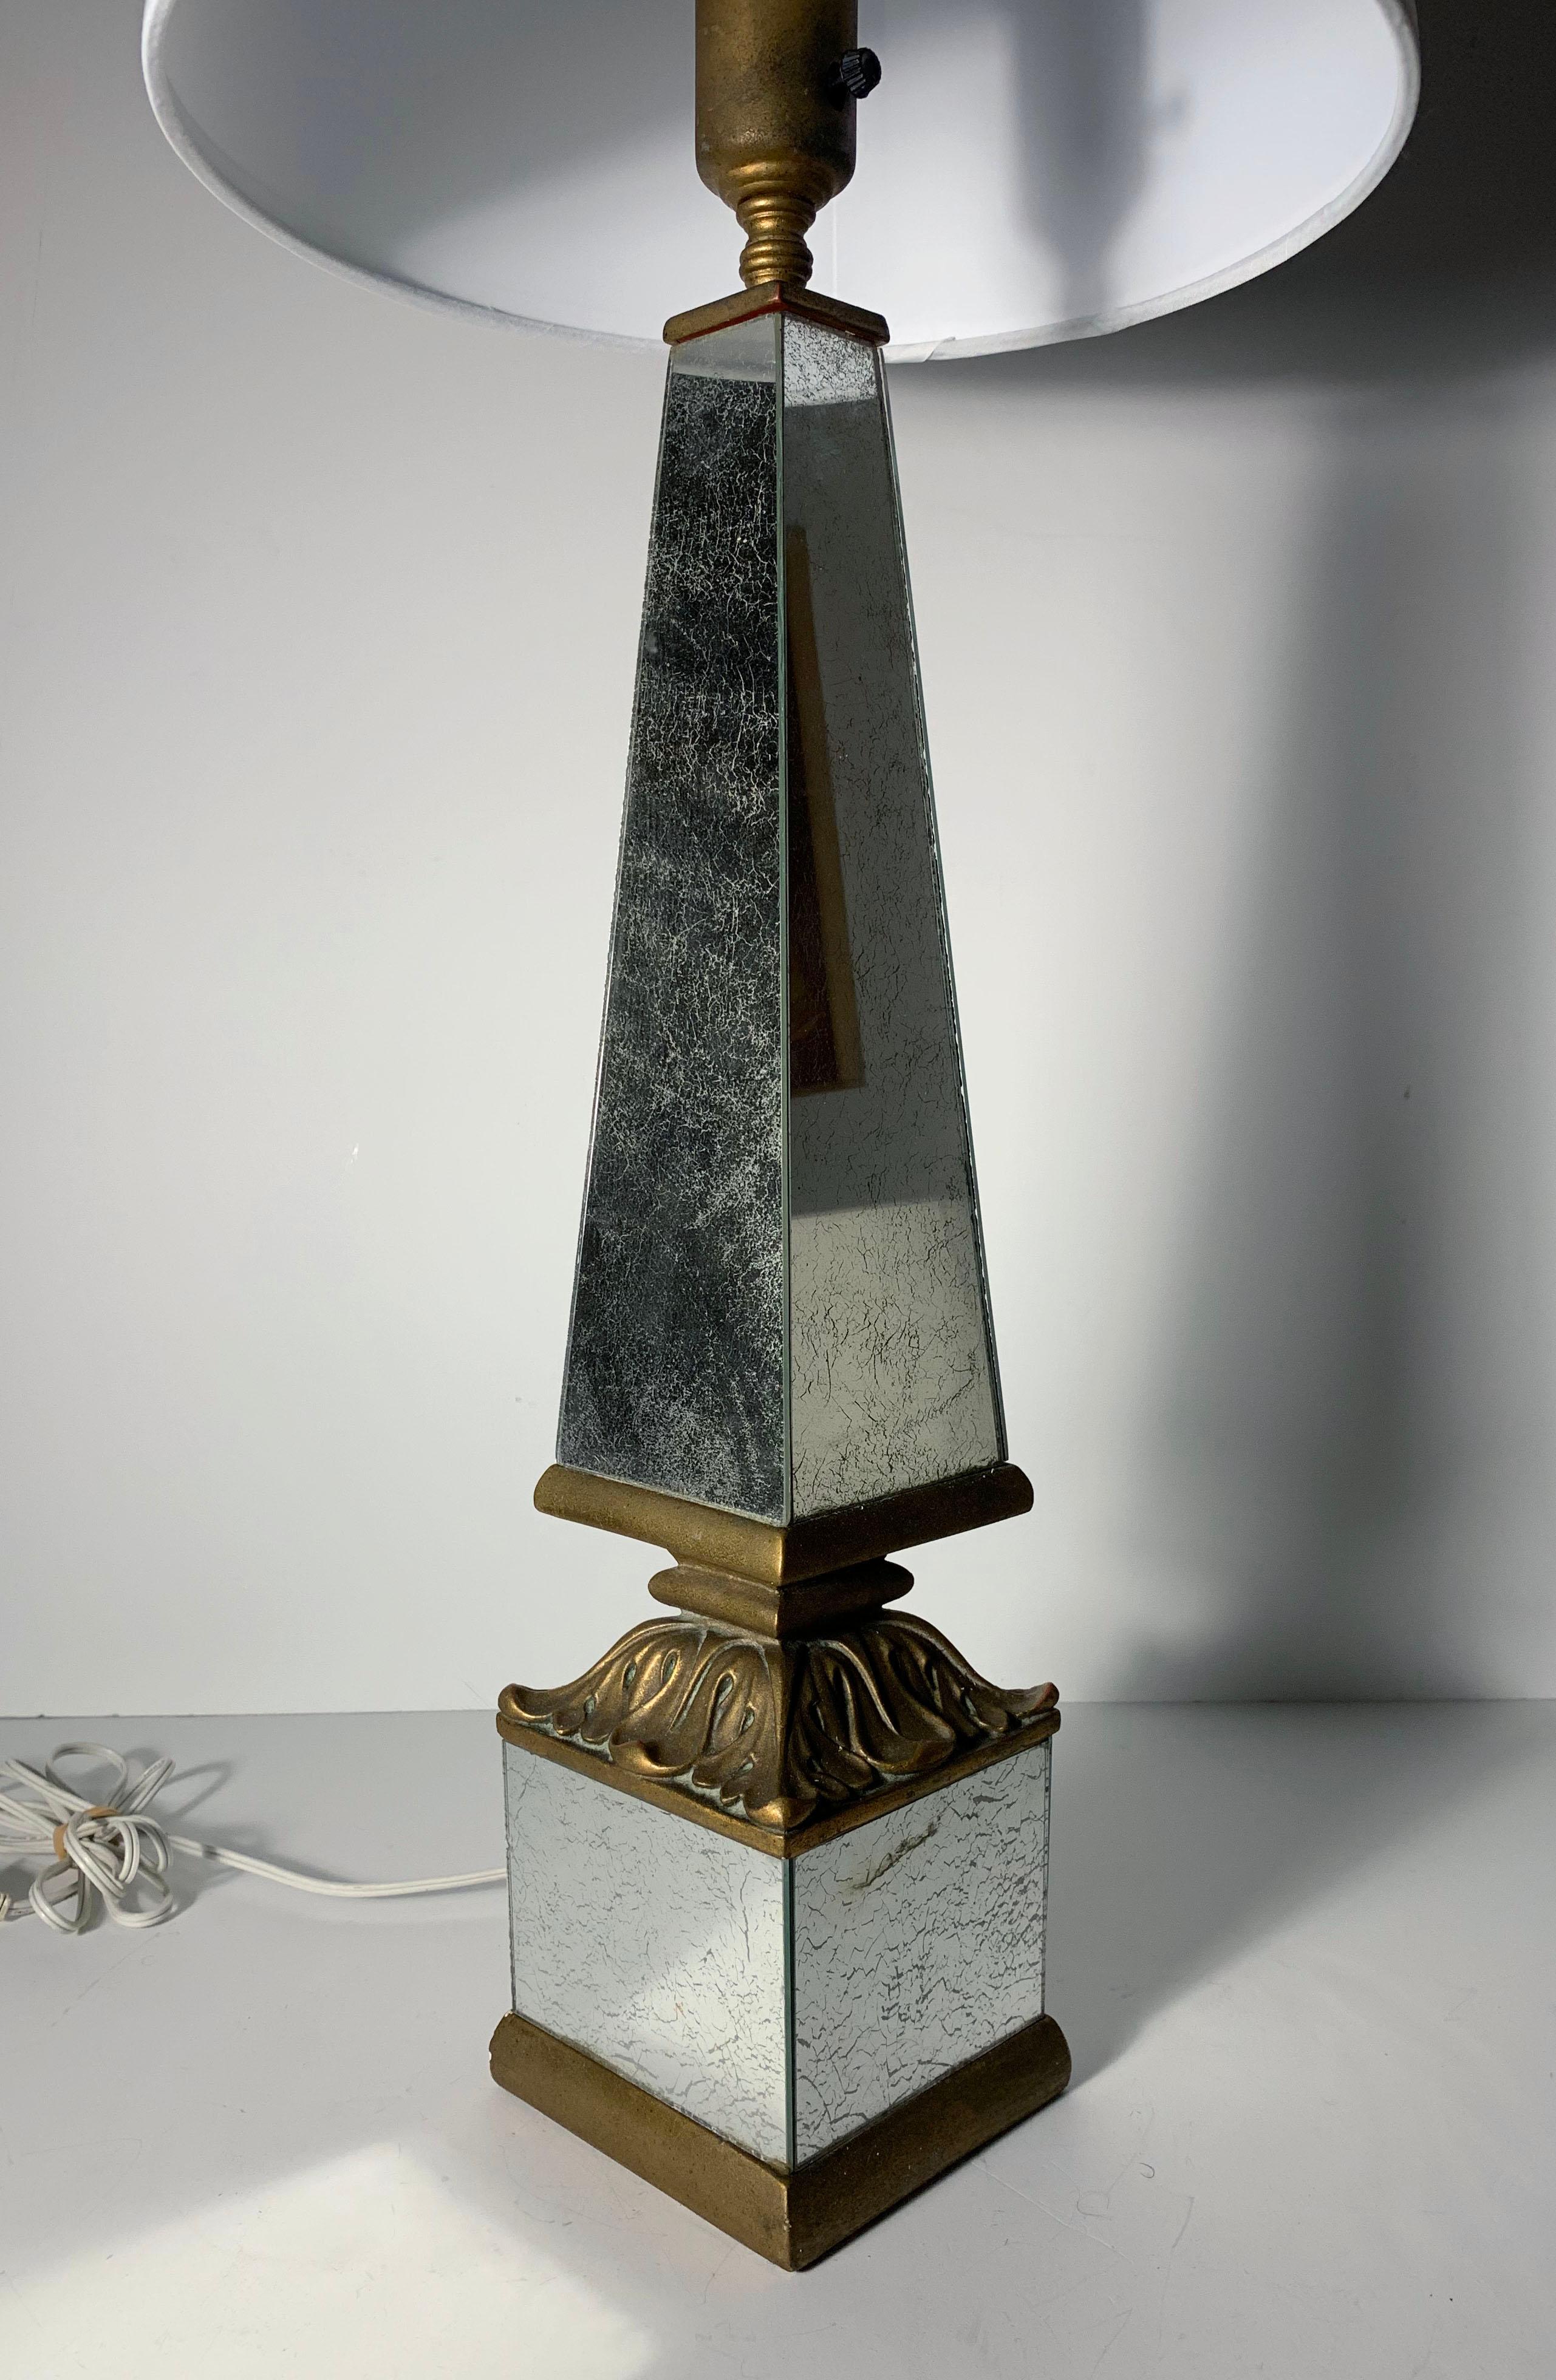 Pair of 1940s Hollywood Regency Mirrored Obelisk Form Table Lamps In Fair Condition For Sale In Chicago, IL